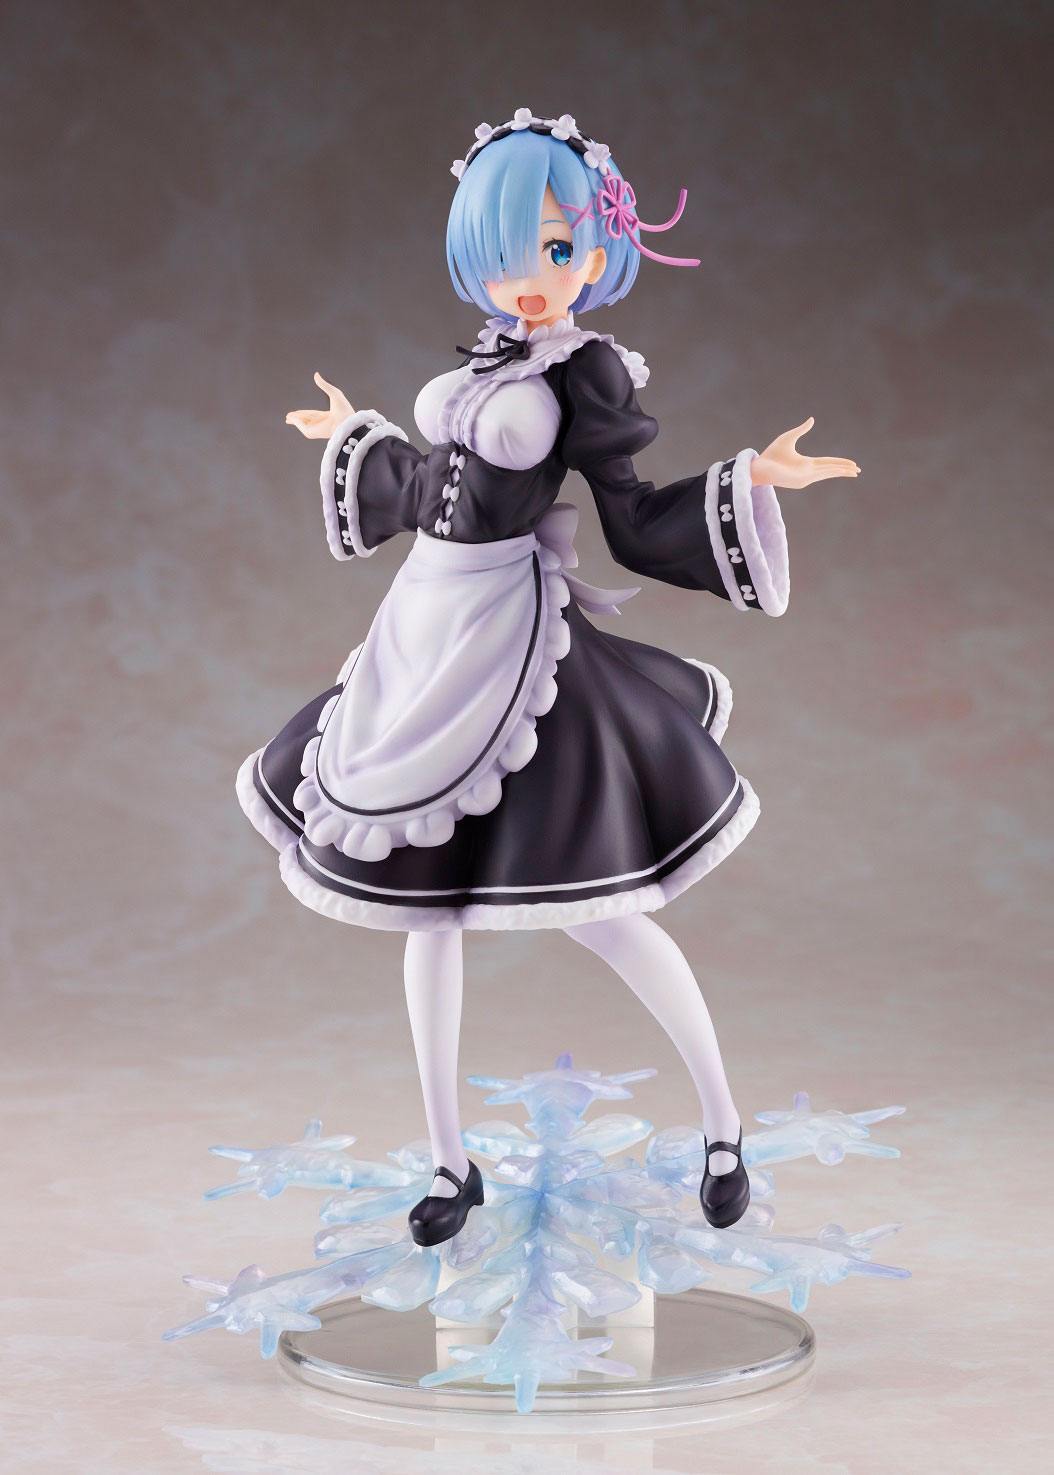 Rem - Winter Maid Ver. - AMP / Re:Zero - Starting Life in Another World